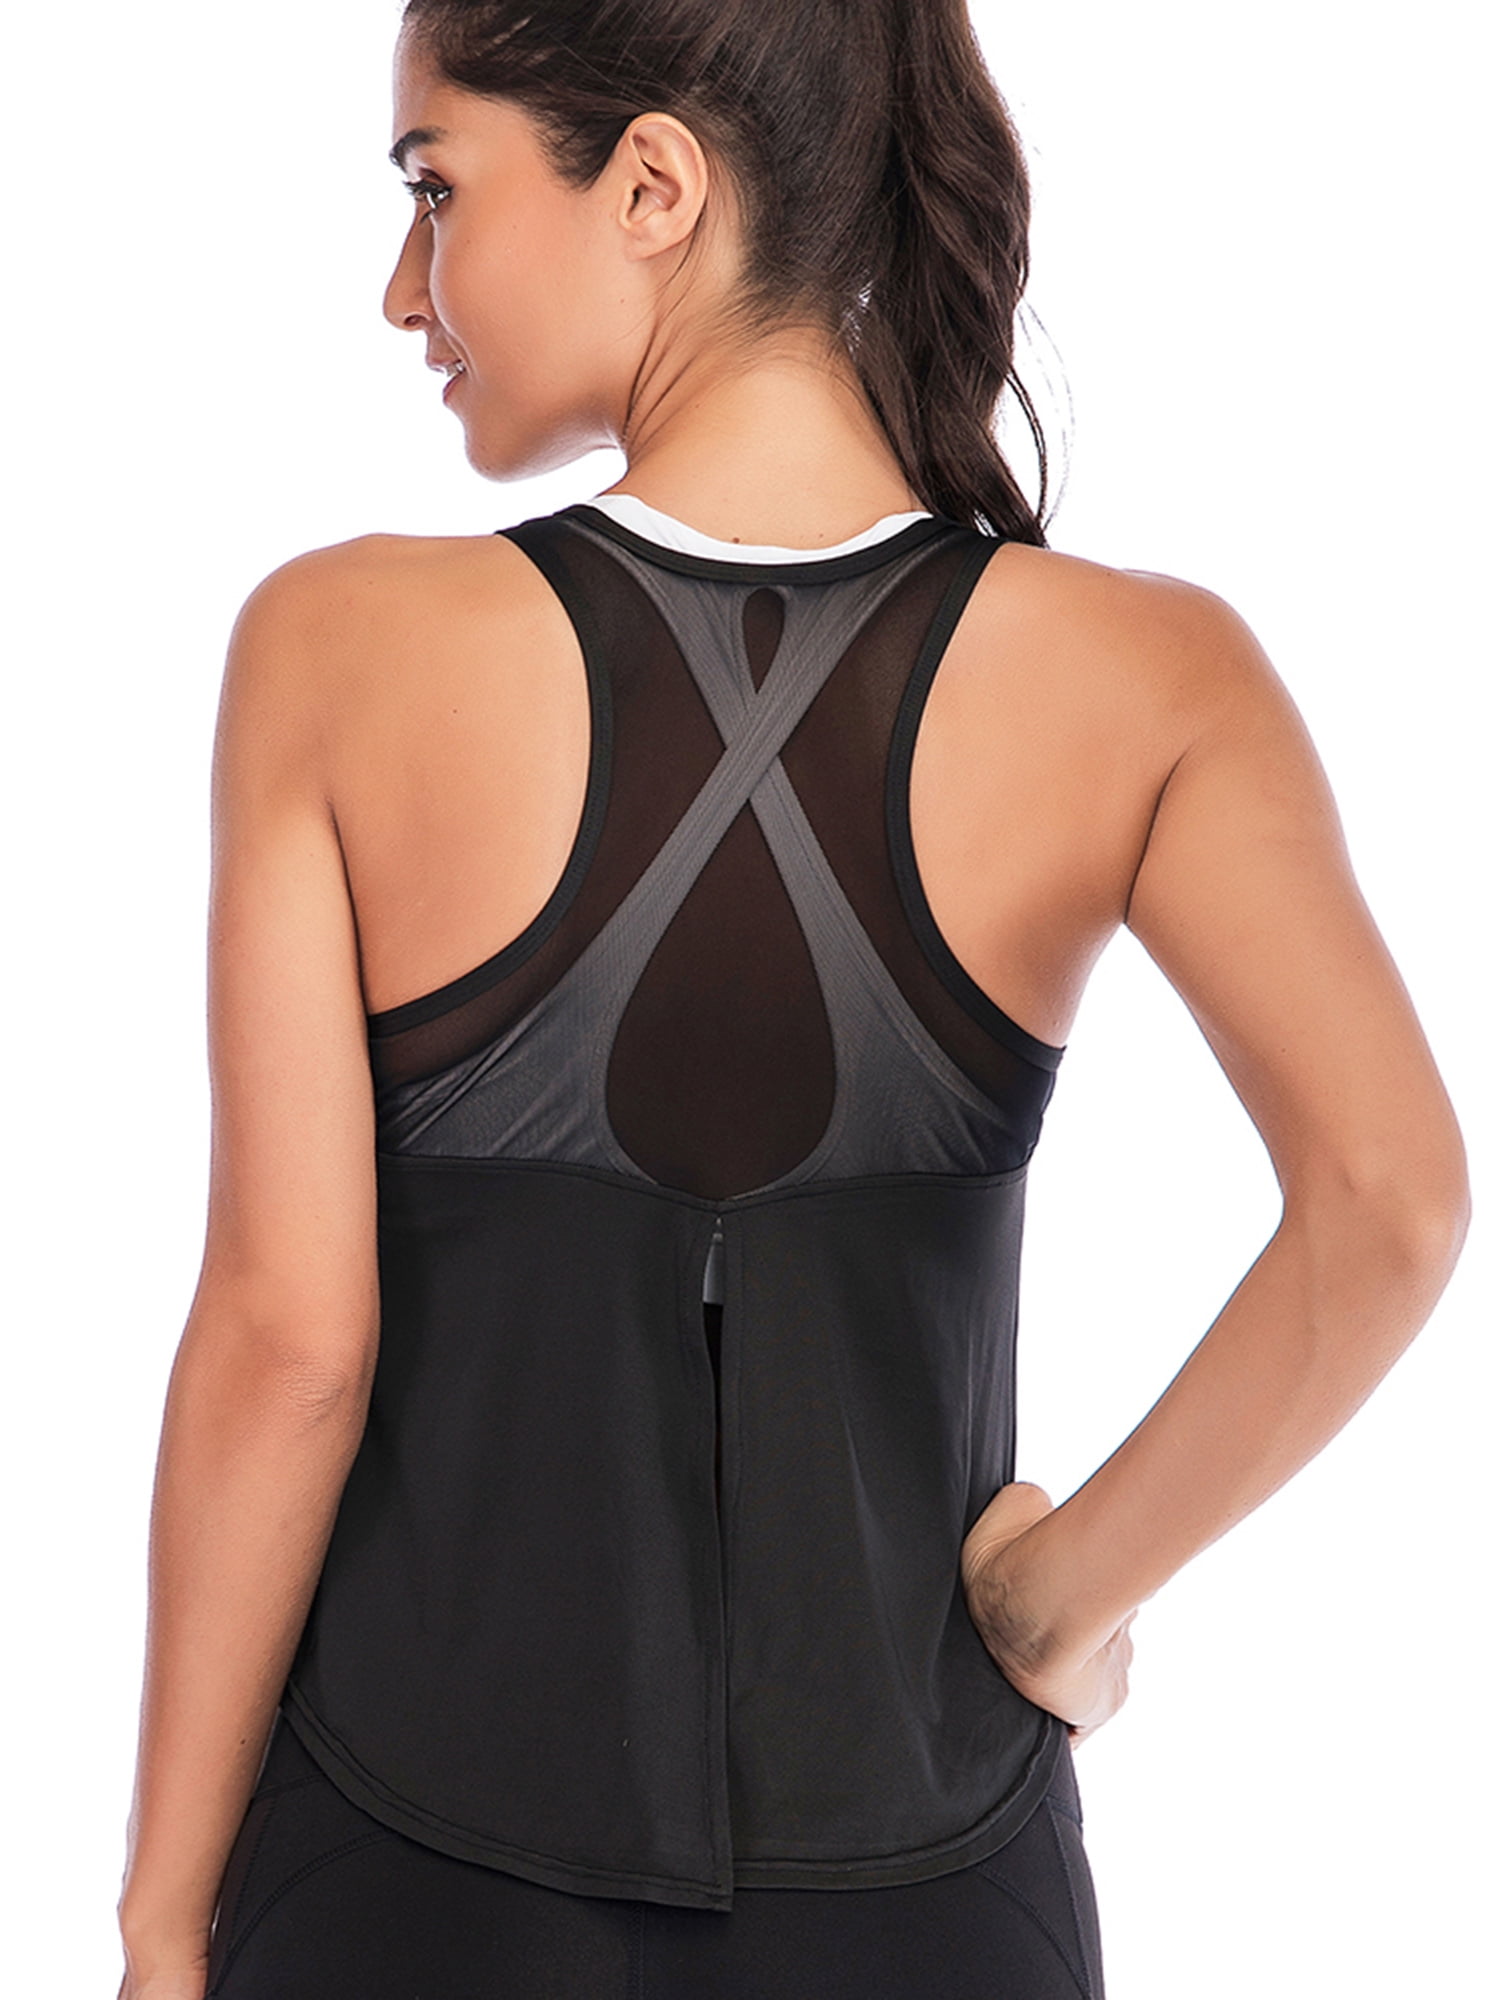  Mesh Workout Top for Push Pull Legs